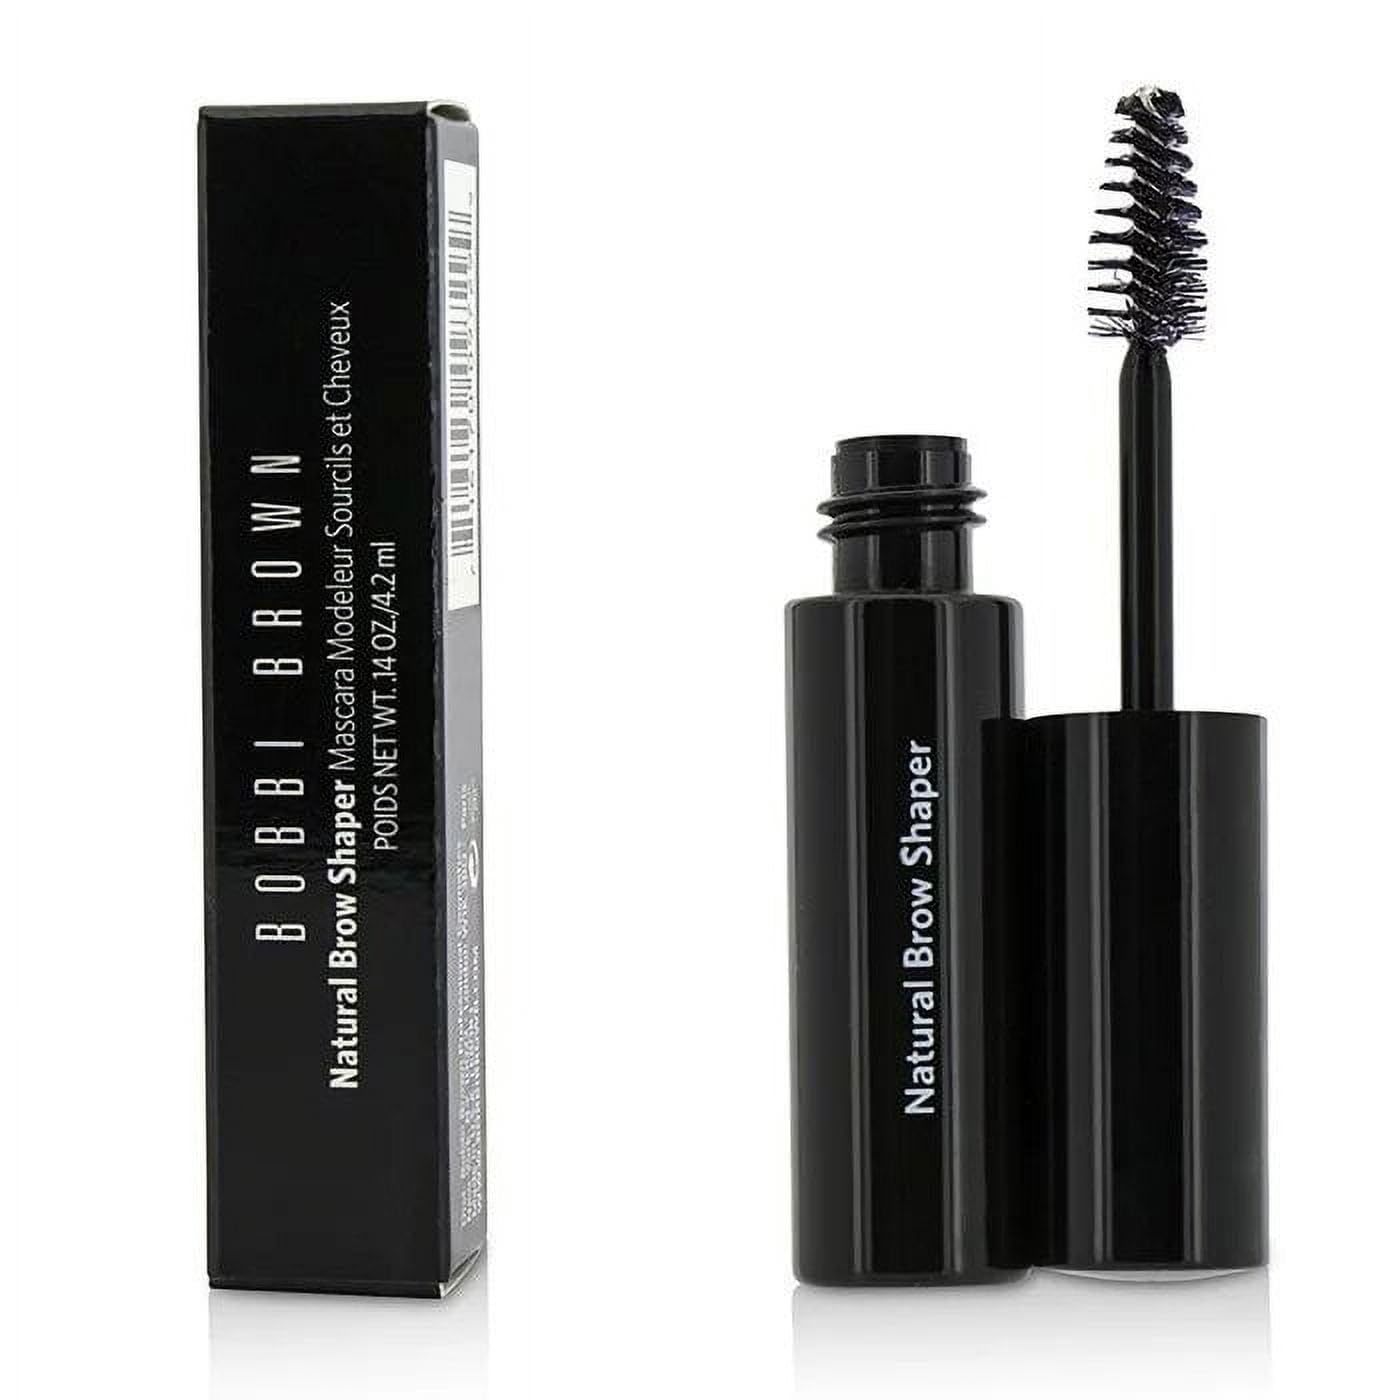 Primary image for Bobbi Brown Natural Brow Shaper, Clear, 0.14 Ounce